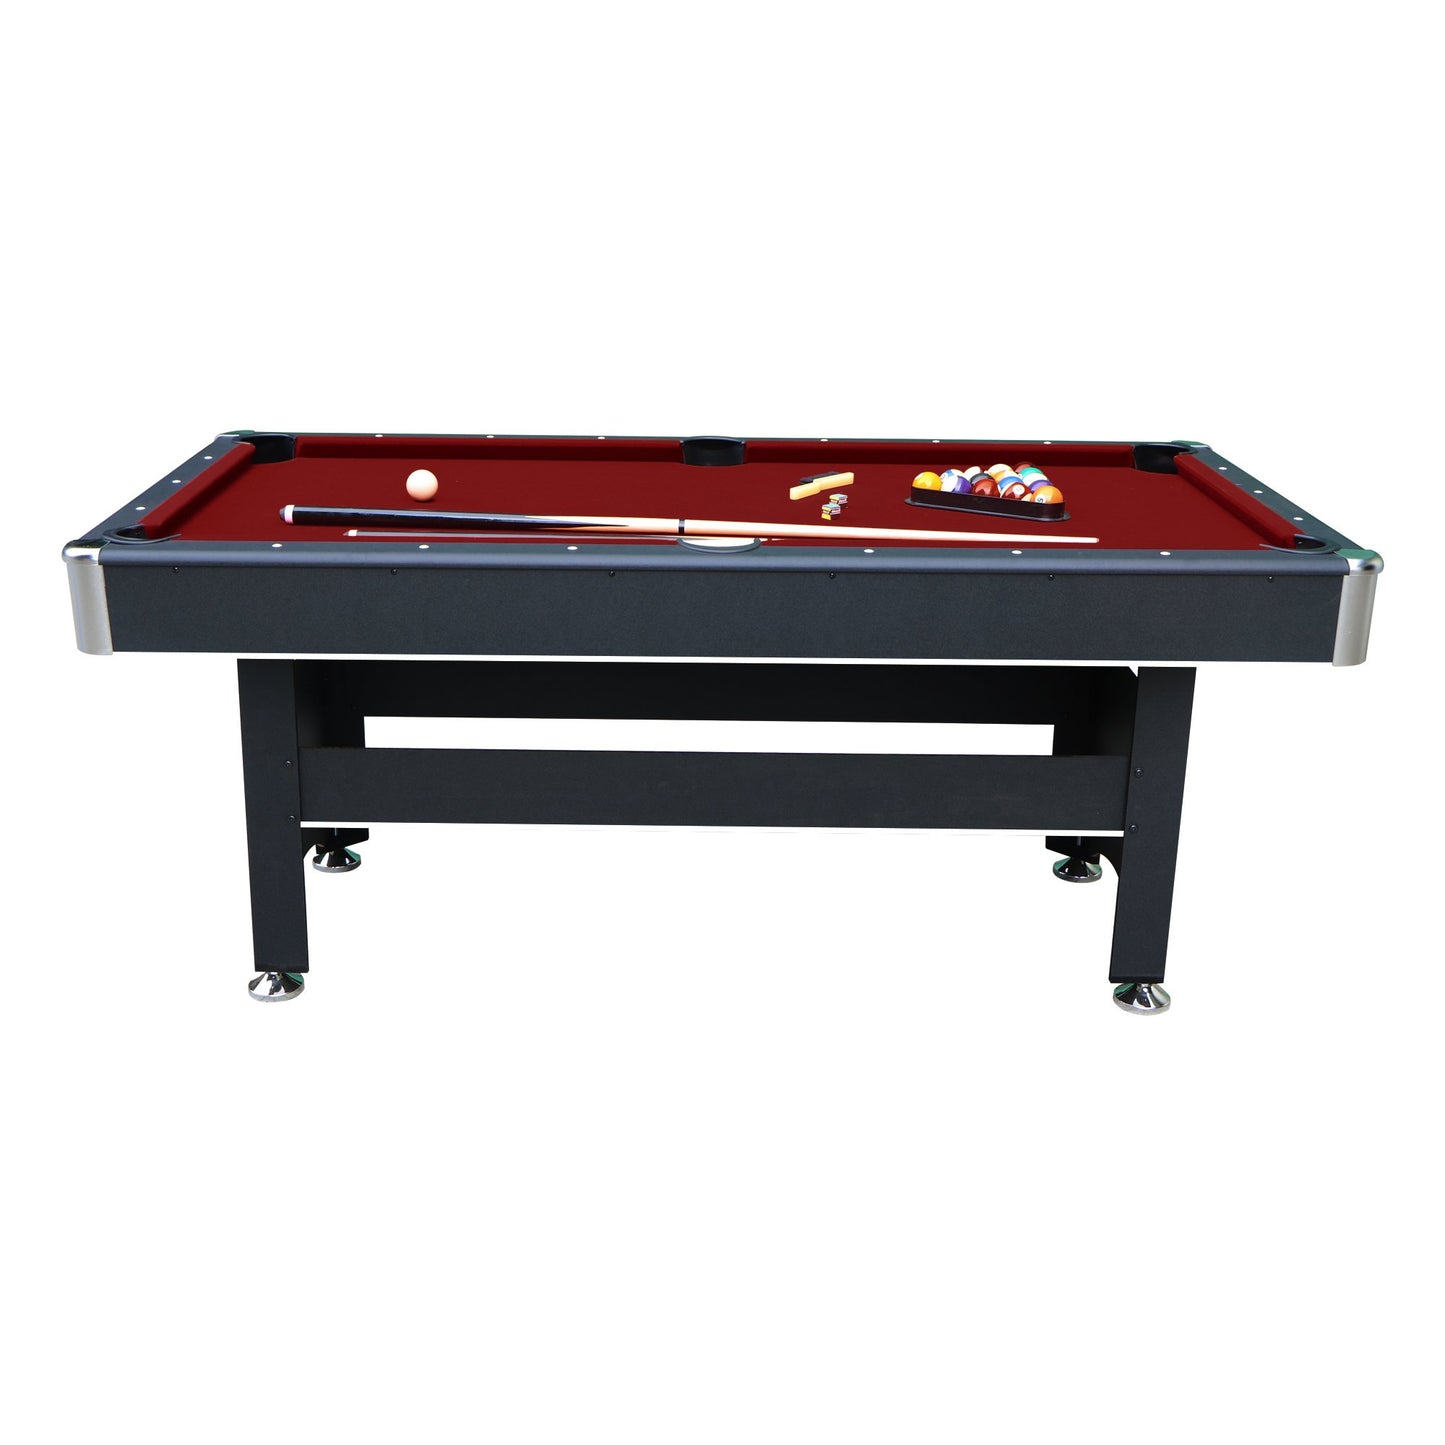 Hathaway Spartan 6ft Multi Game Table 2 in 1 - Gaming Blaze